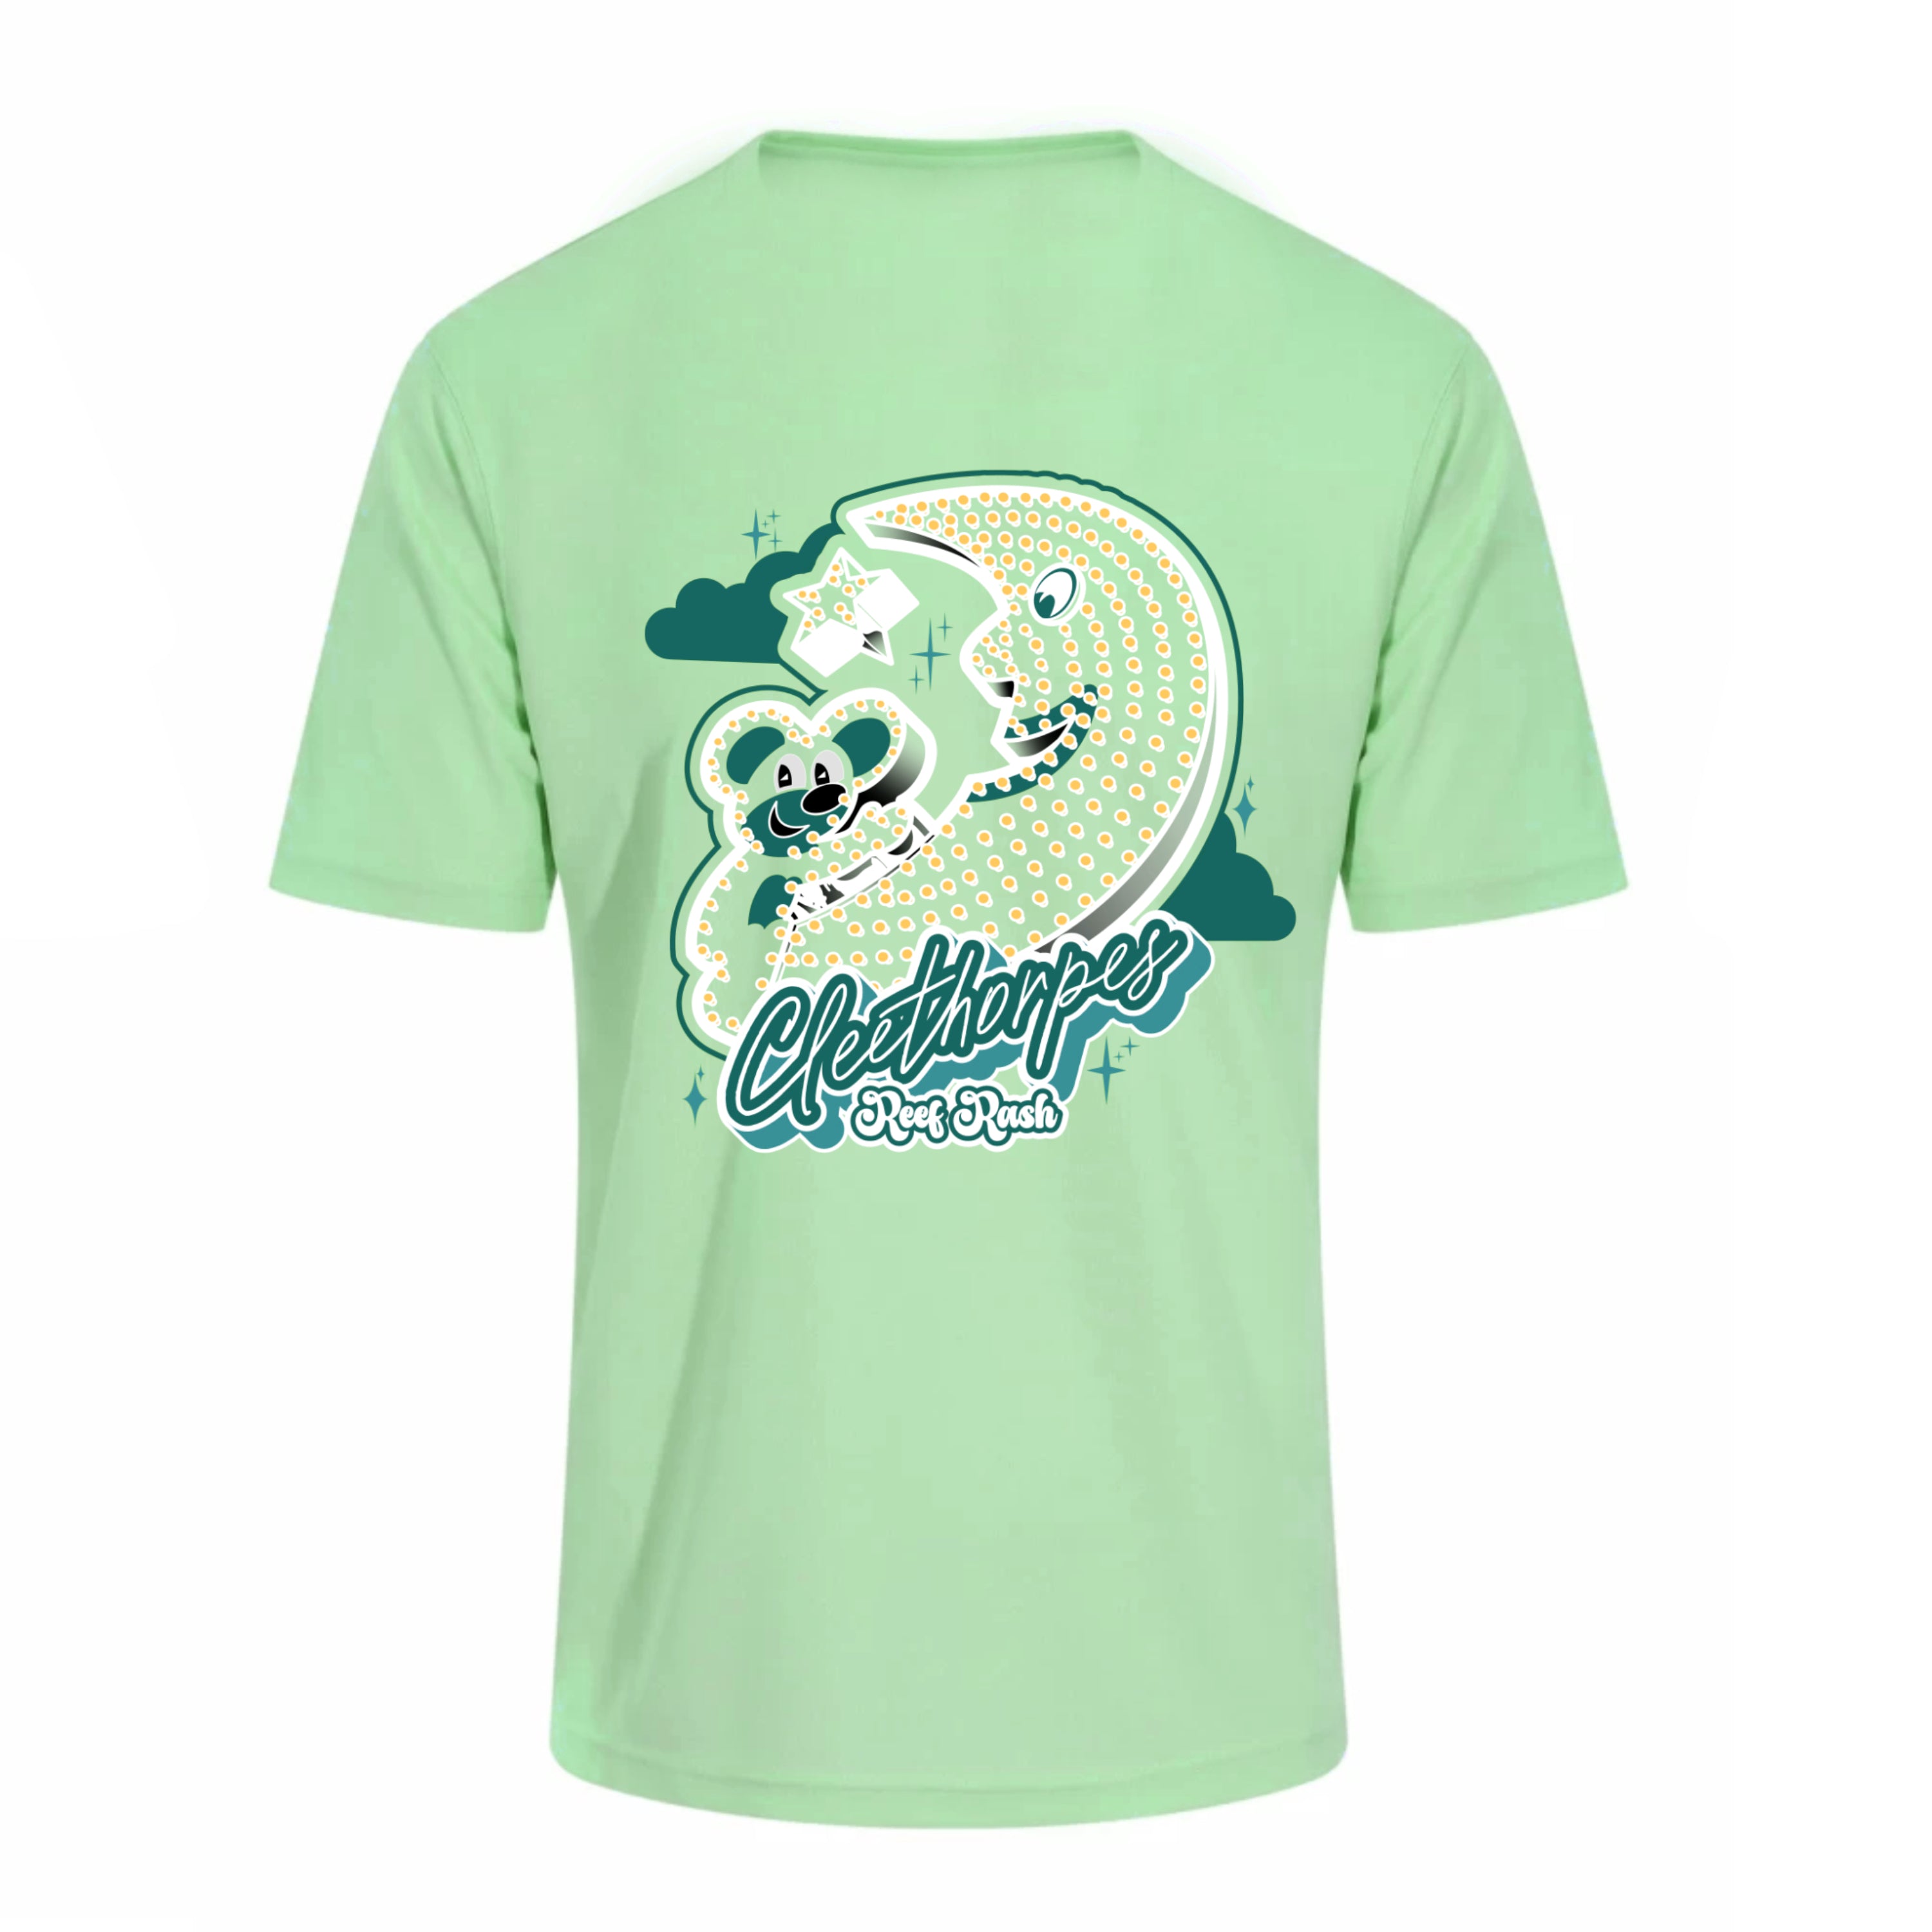 CLEETHORPES MOUSE AND MOON T-SHIRT - MINT